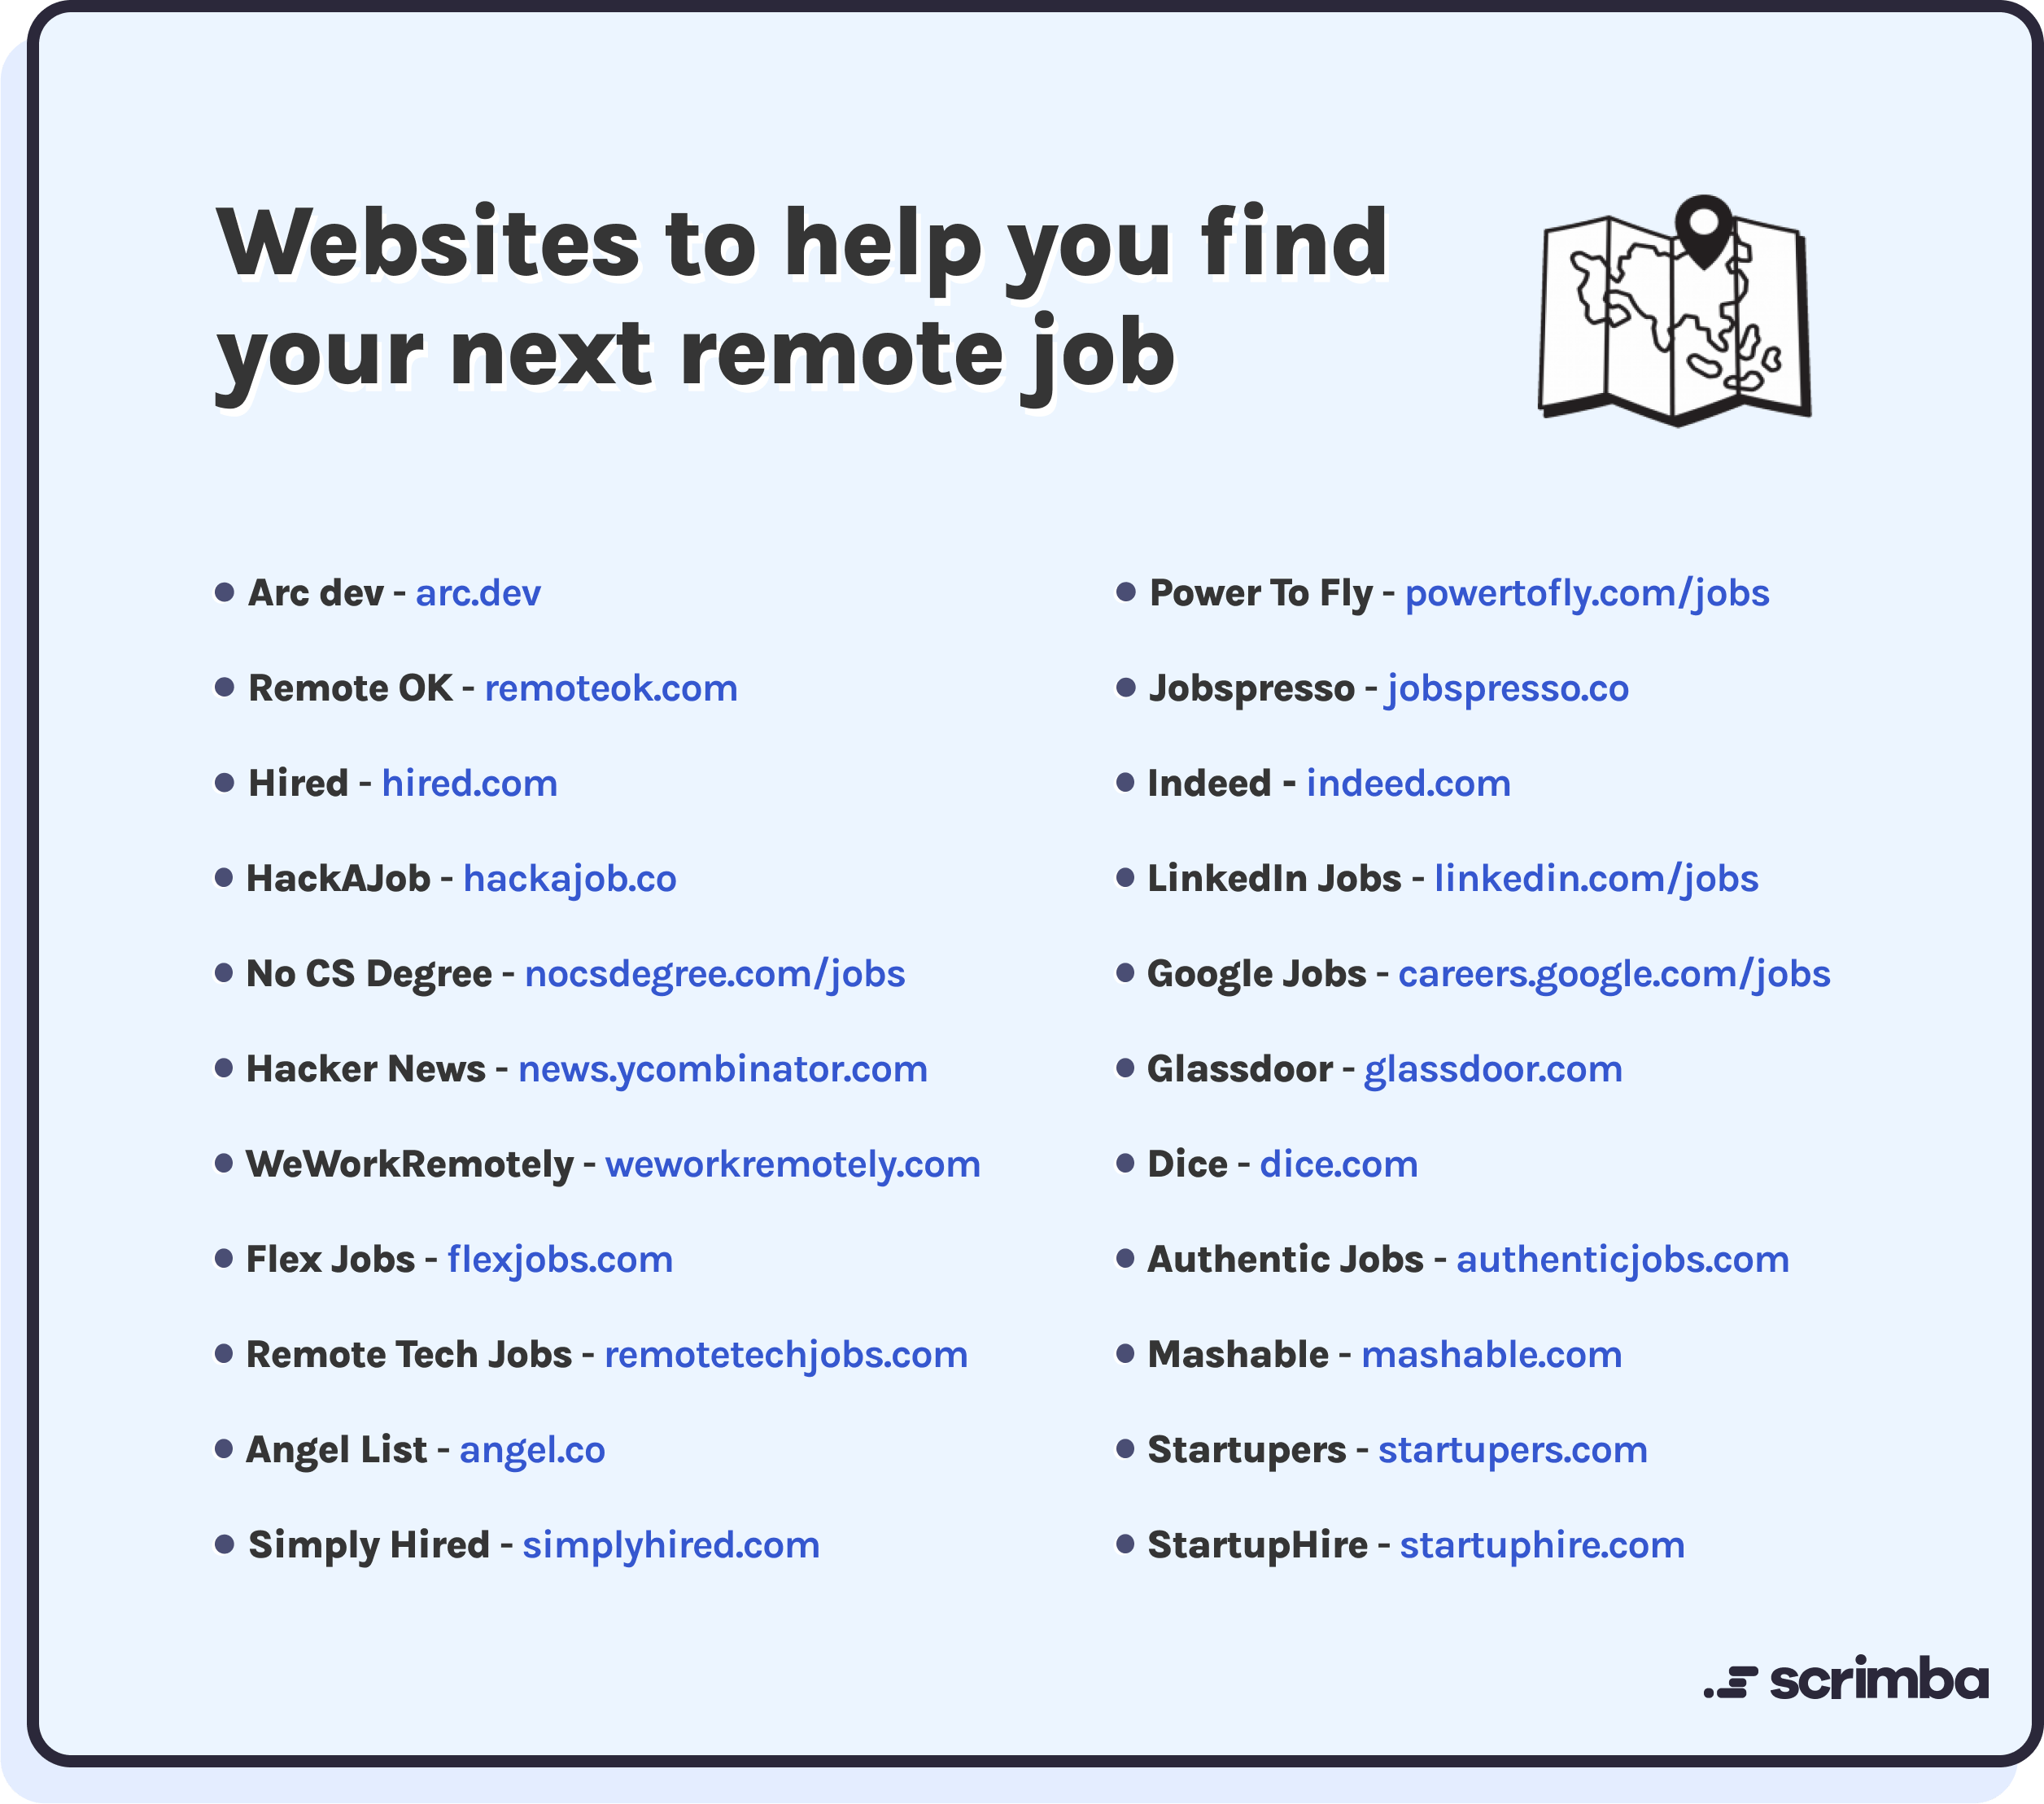 Websites-to-help-you-find-your-next-remote-job-3.png